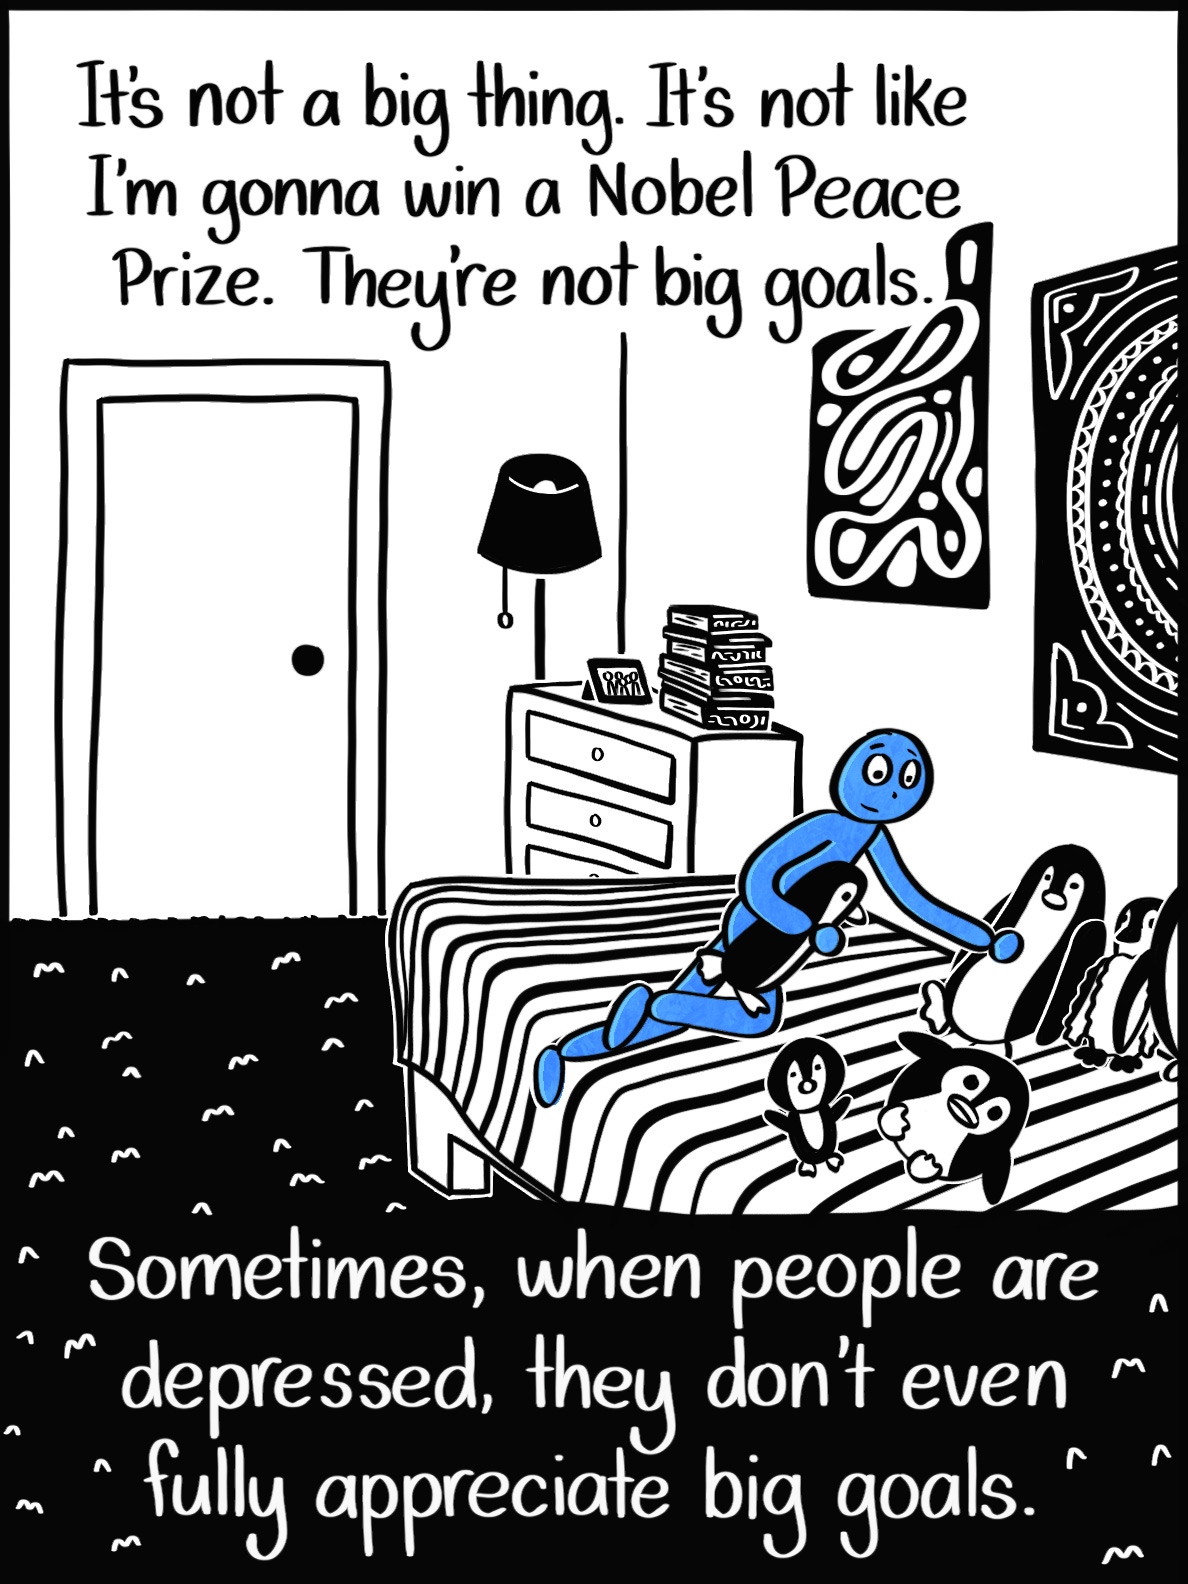 Caption: It's not a big thing. It's not like I'm gonna win a Nobel Peace Prize. They're not big goals. Sometimes, when people are depressed, they don't even fully appreciate big goals. Image: Wider angle of the blue person in their bedroom, in the middle of arranging the stuffed penguins on their bed.